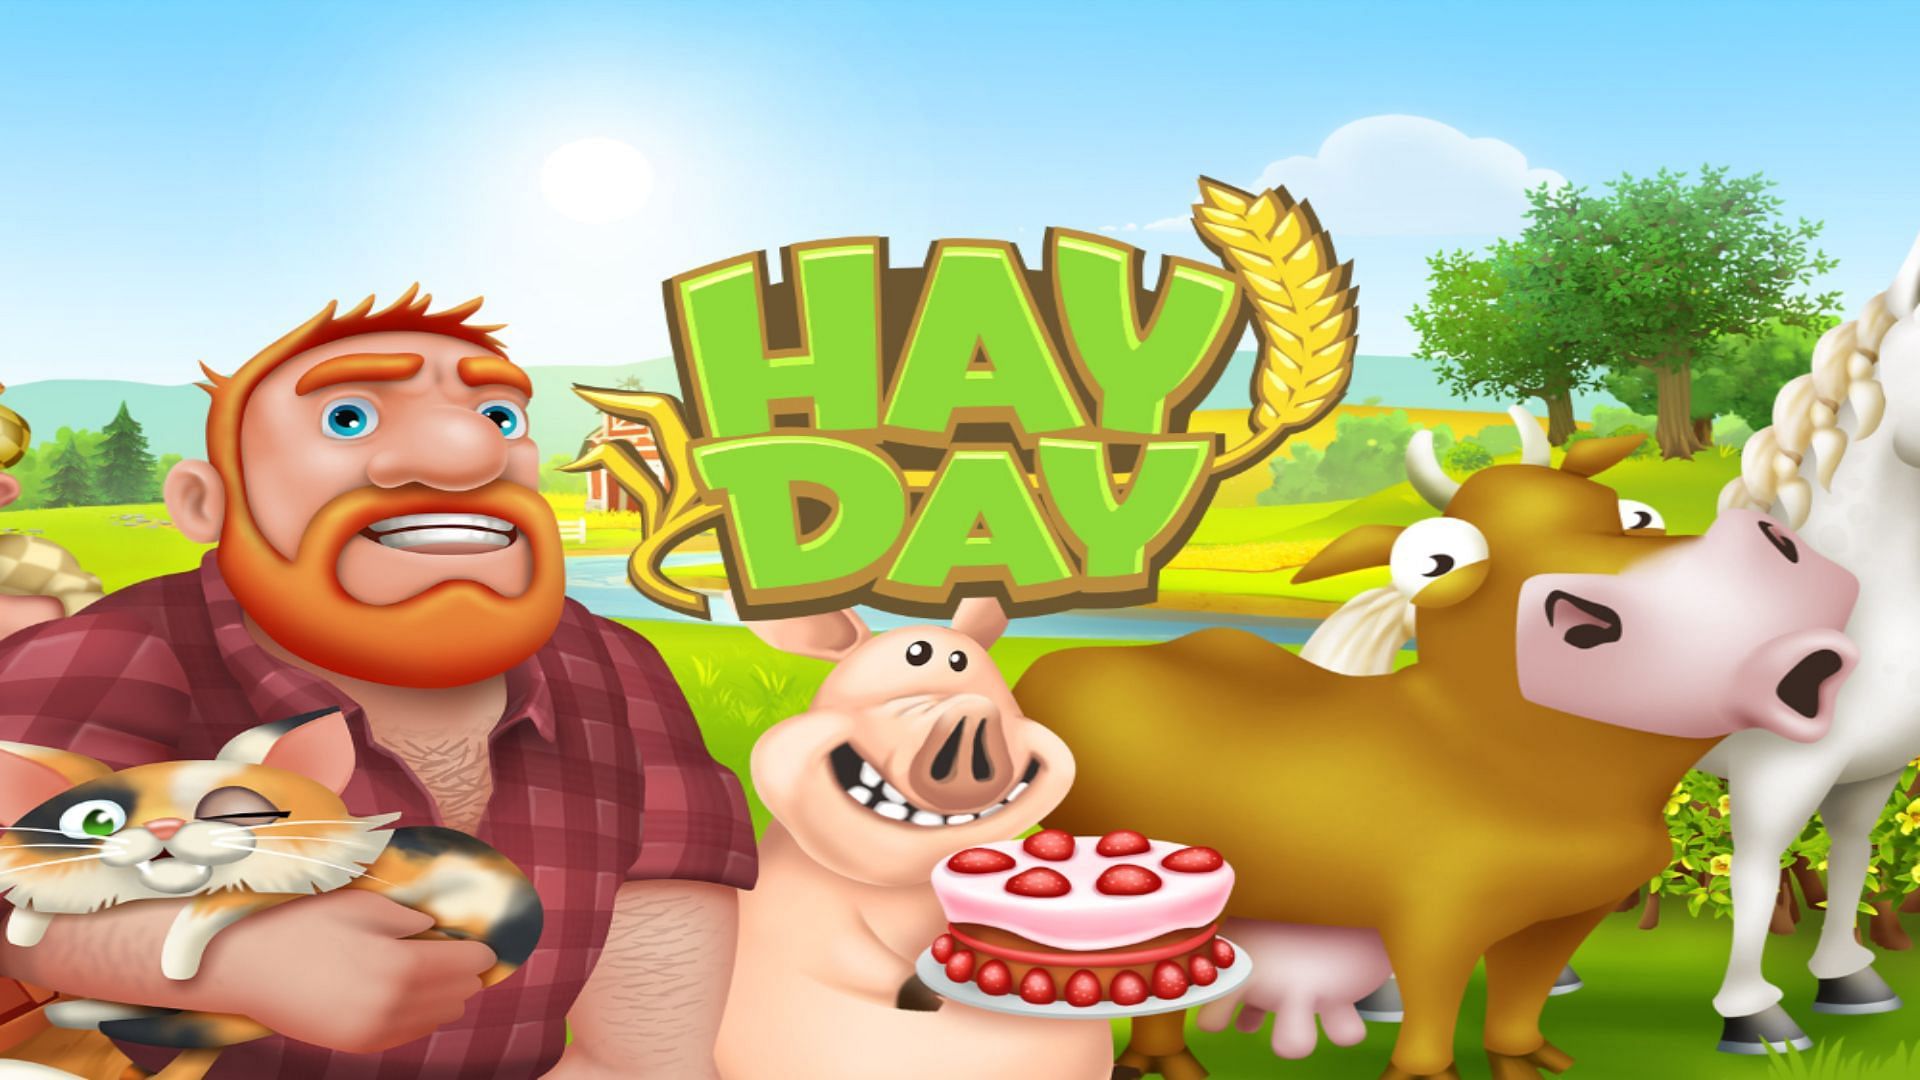 Hay Day official poster (Image via Supercell)